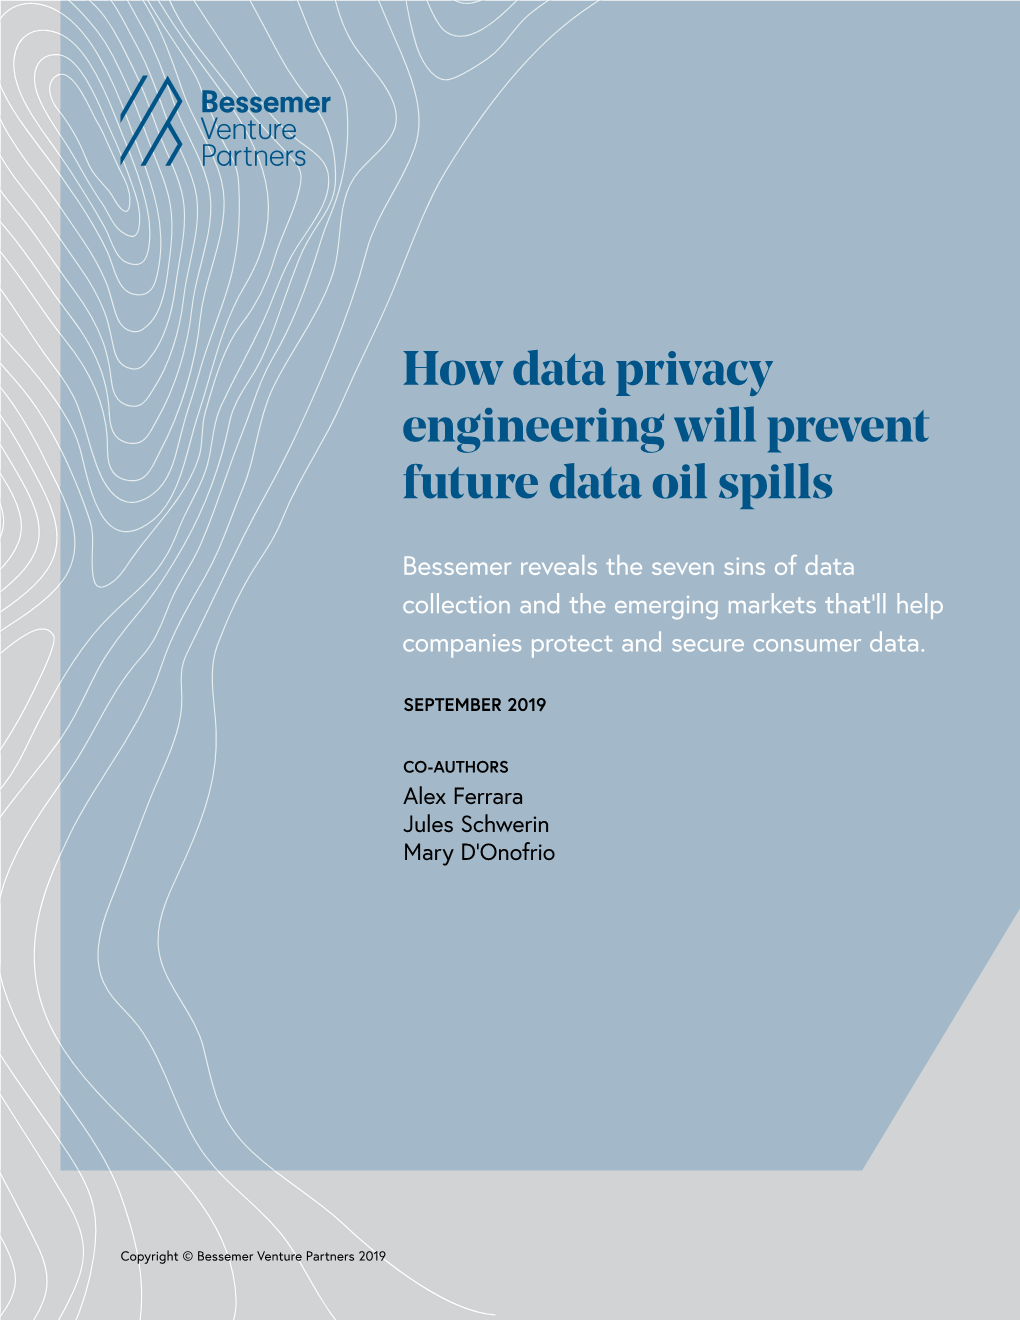 How Data Privacy Engineering Will Prevent Future Data Oil Spills